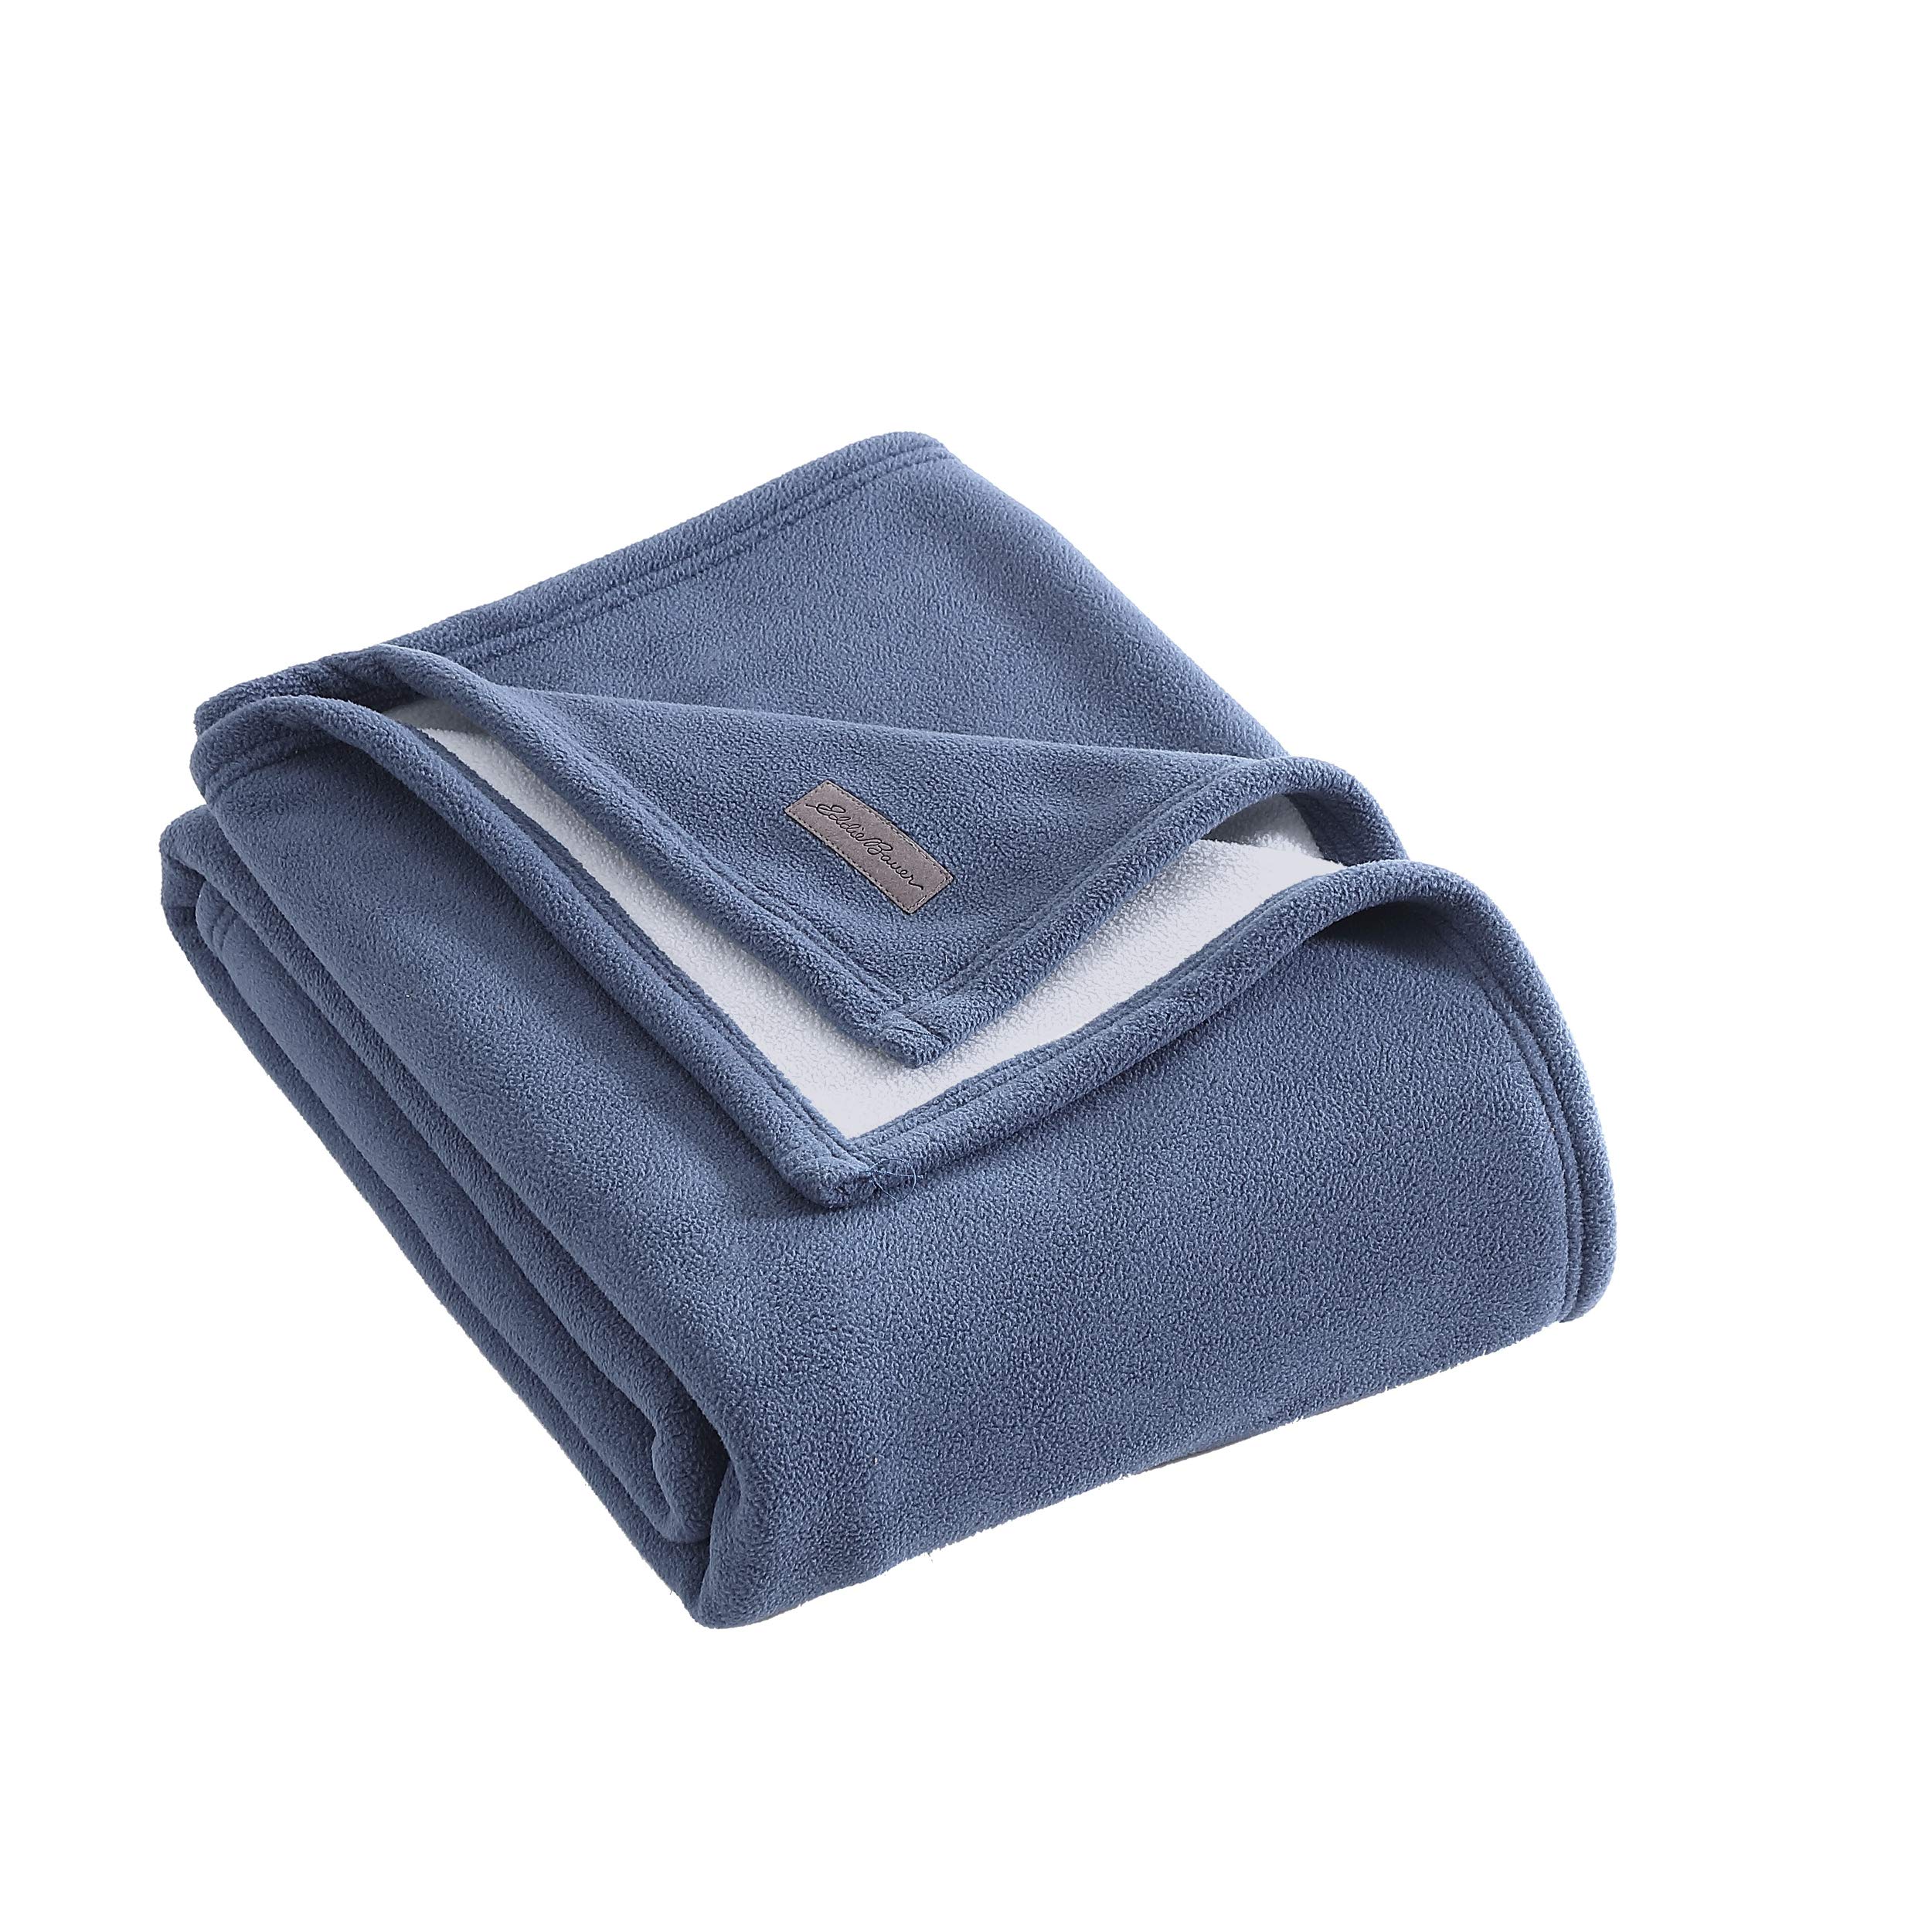 60"x50" Eddie Bauer Ultra-Plush Collection Throw Blanket (Blue/Light Grey) $11.80 + Free Shipping w/ Prime or on $35+